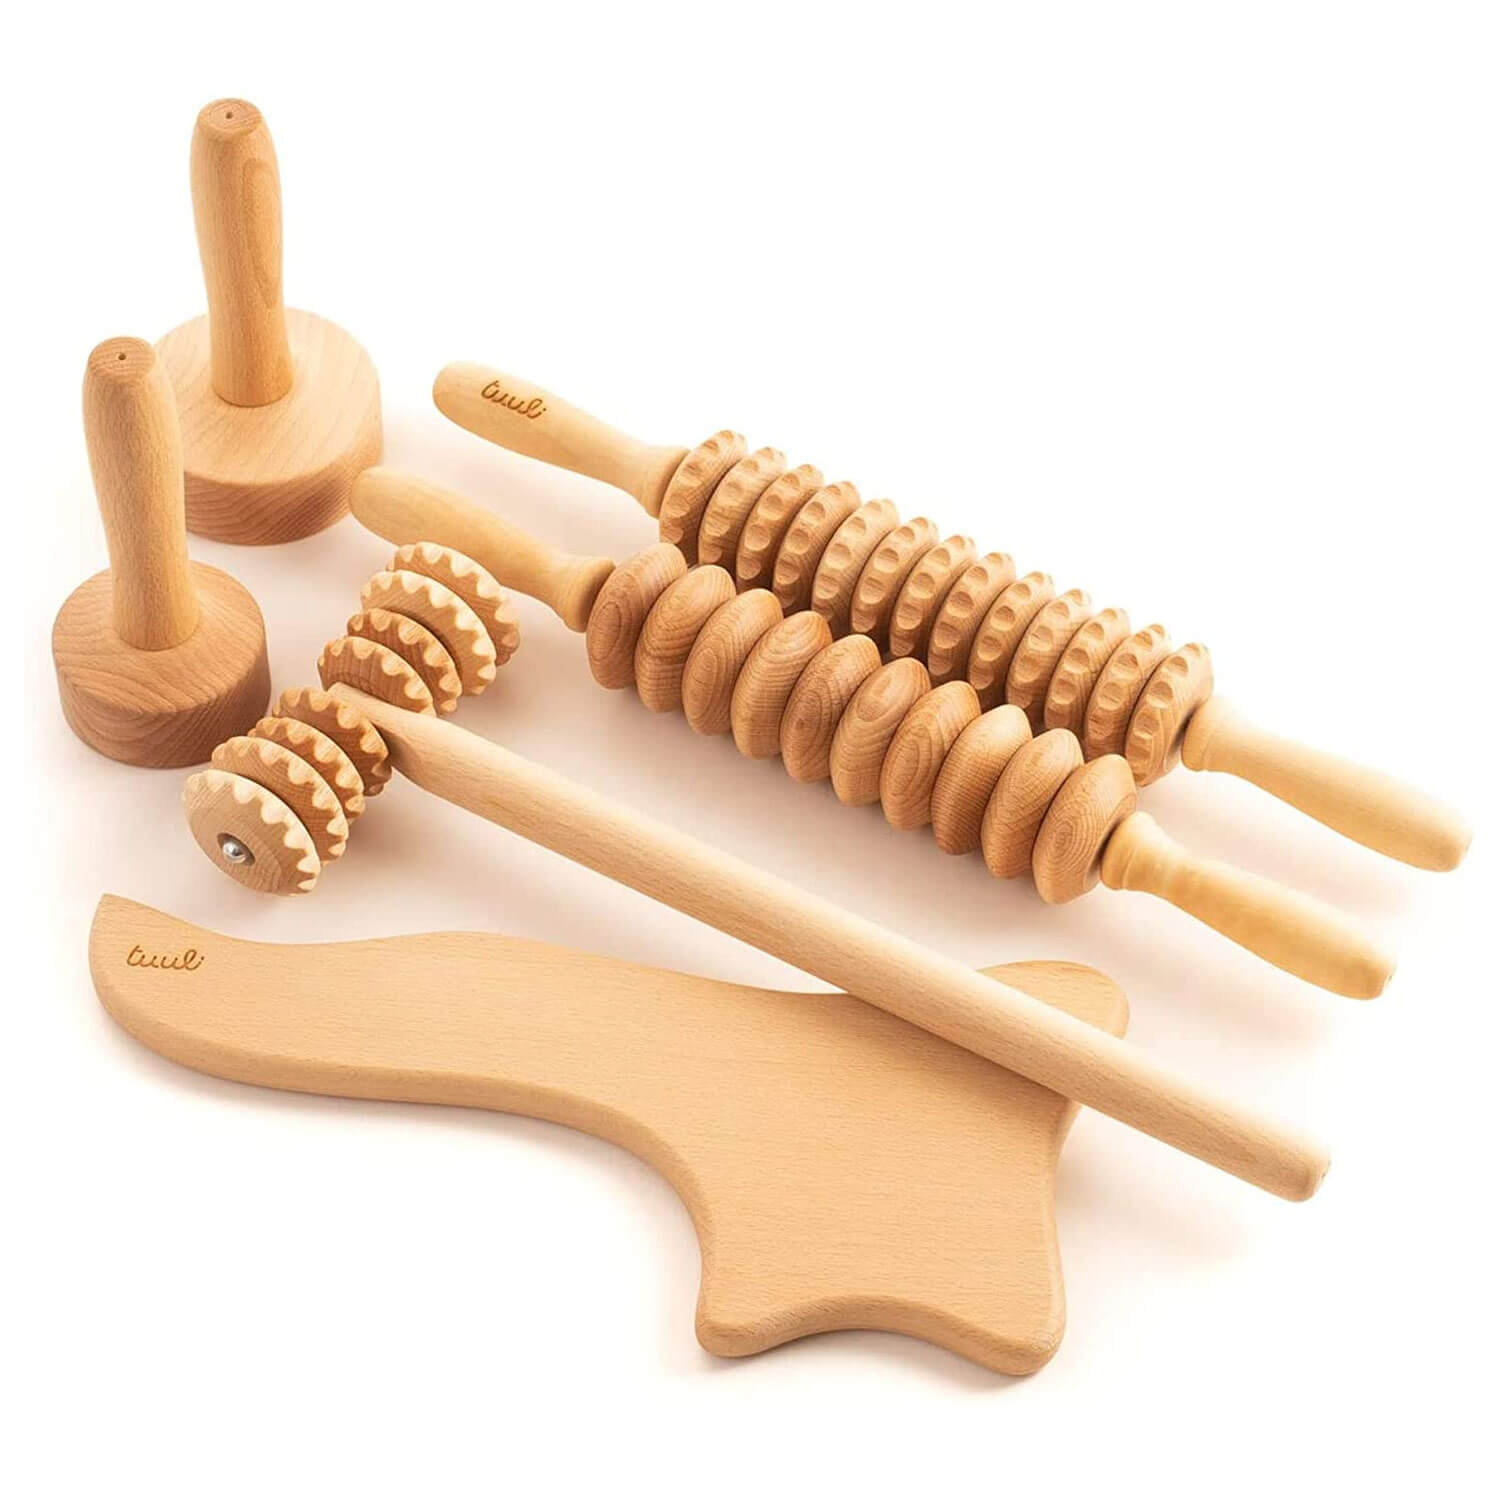 6 Piece Wooden Massager Set - Maderotherapy Roller Paddle Cup Relaxation and Wellness